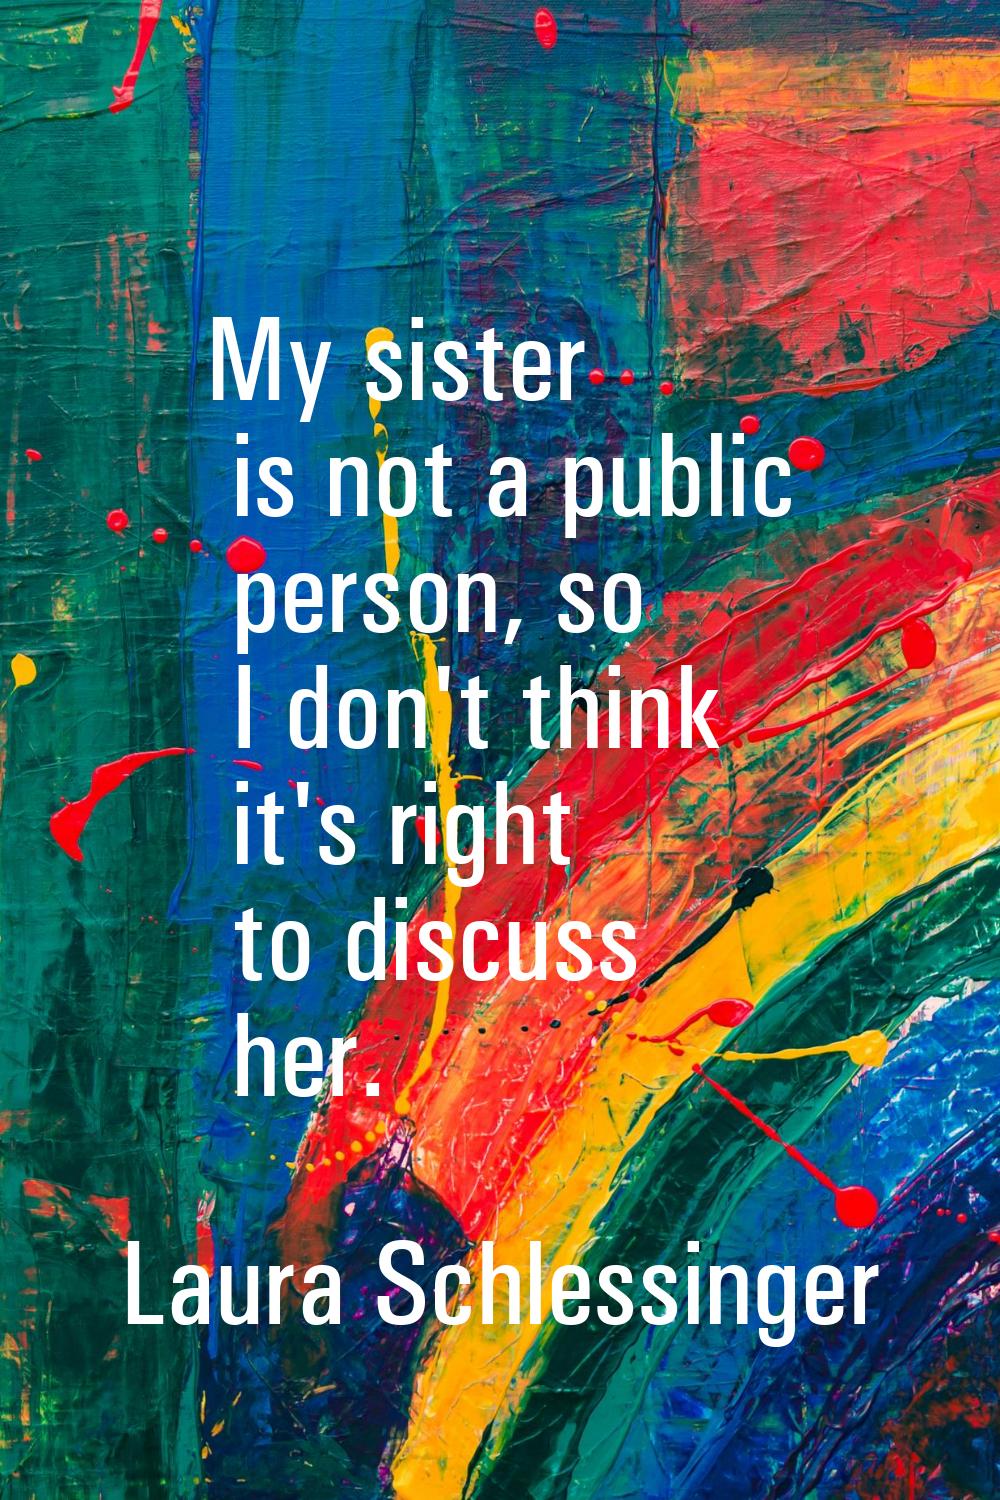 My sister is not a public person, so I don't think it's right to discuss her.